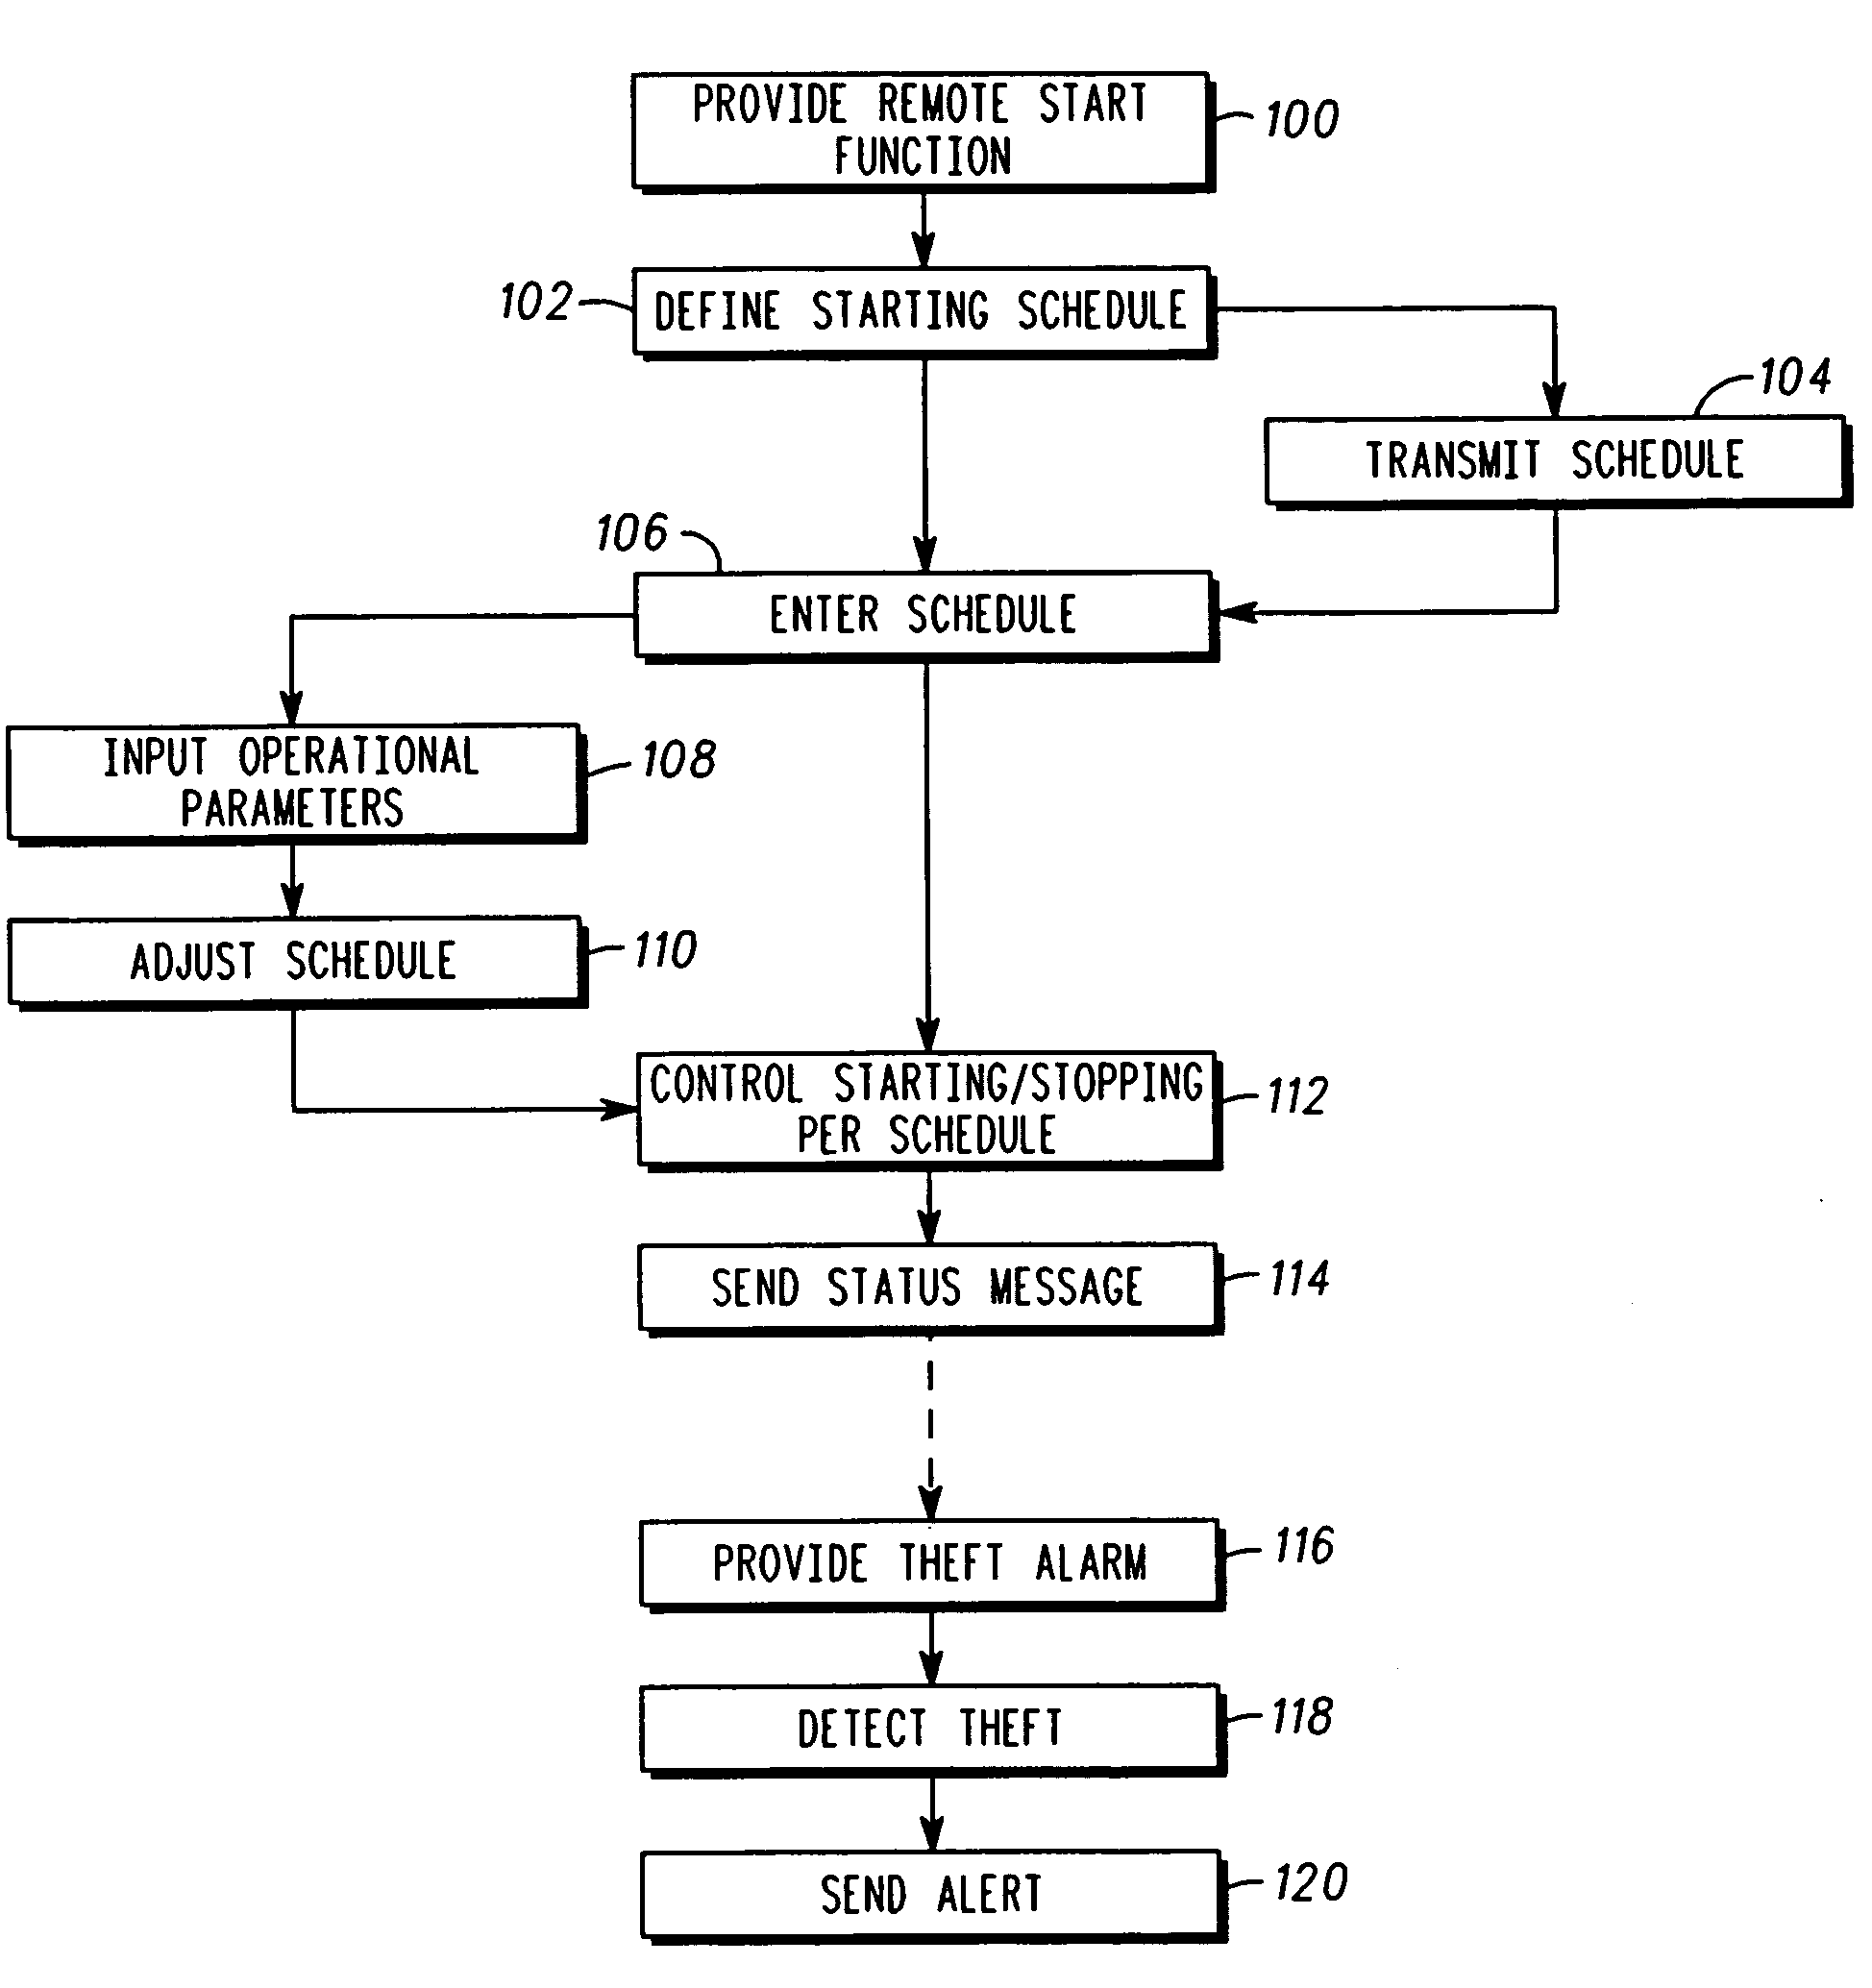 Scheduling remote starting of vehicle